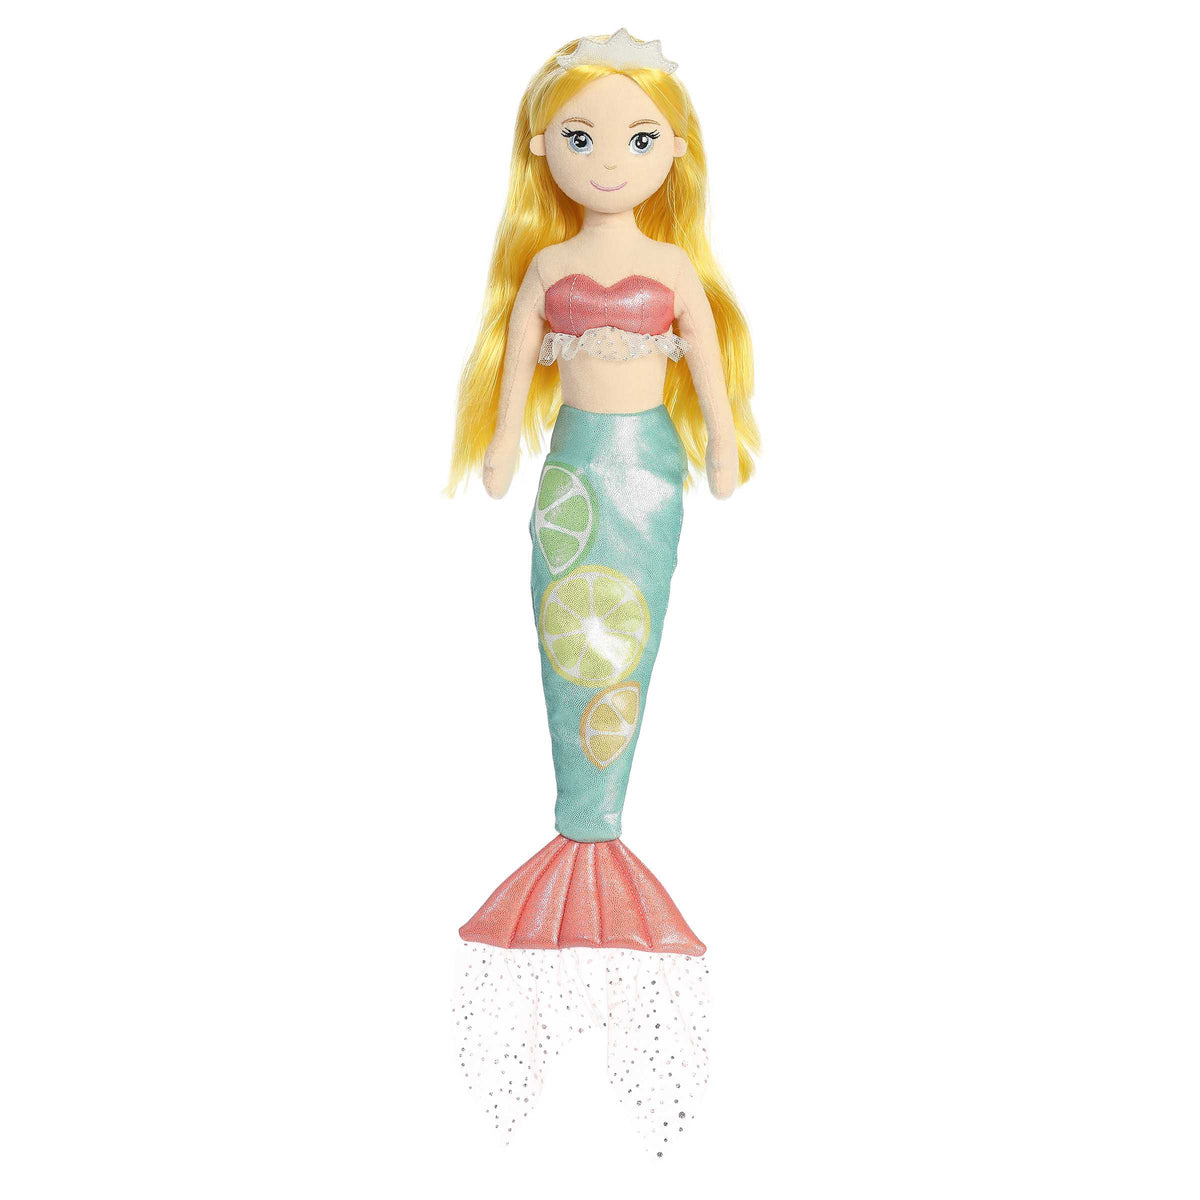 Vibrant Lailah Lemonade mermaid plush with a lemon-lime tail and crown, perfect for playful and bright decor.